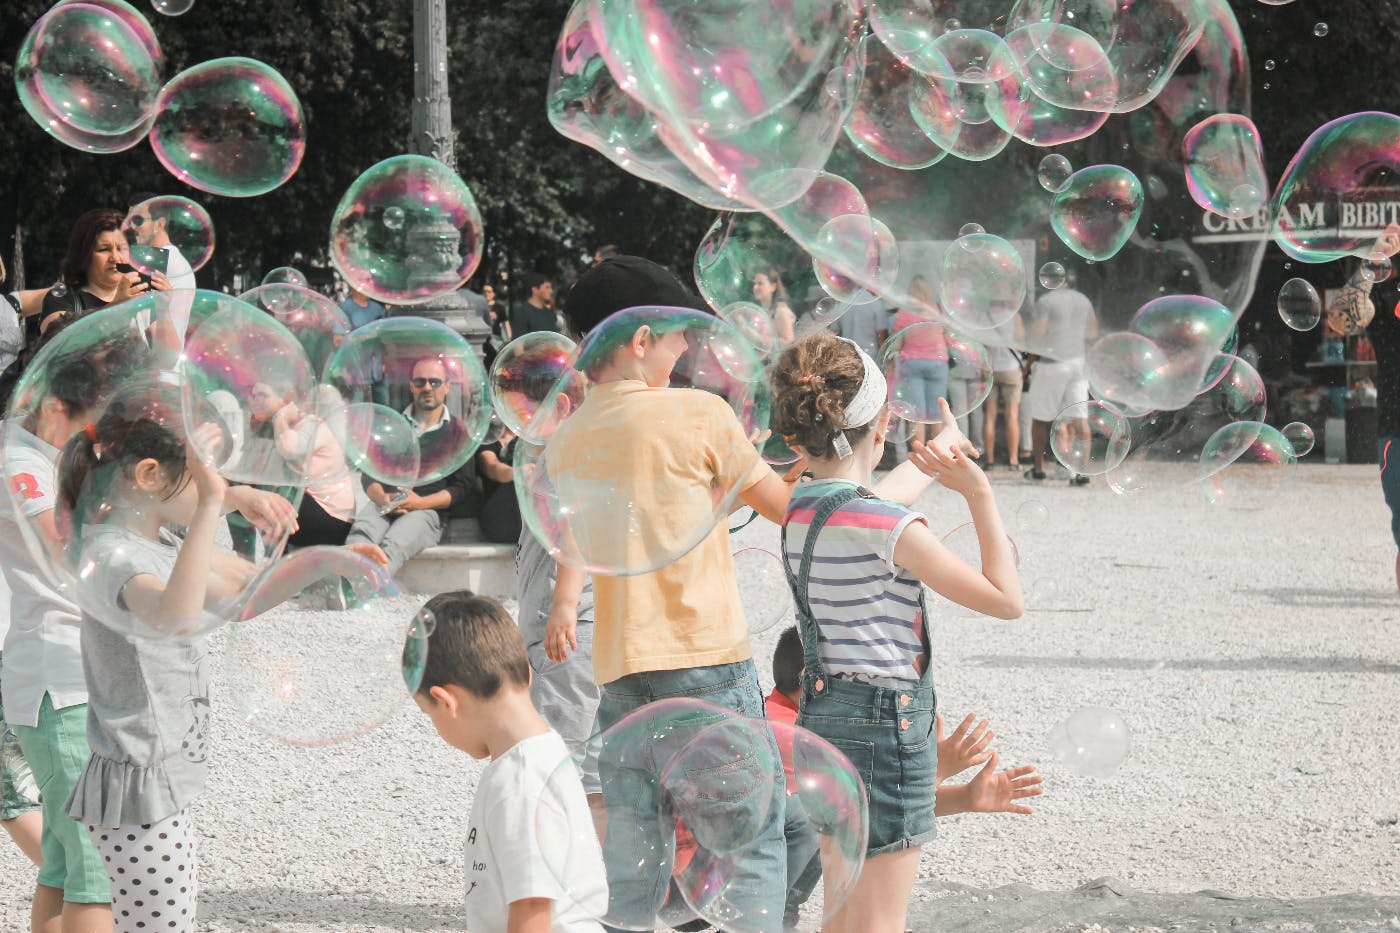 people in a park playing with giant soap bubbles